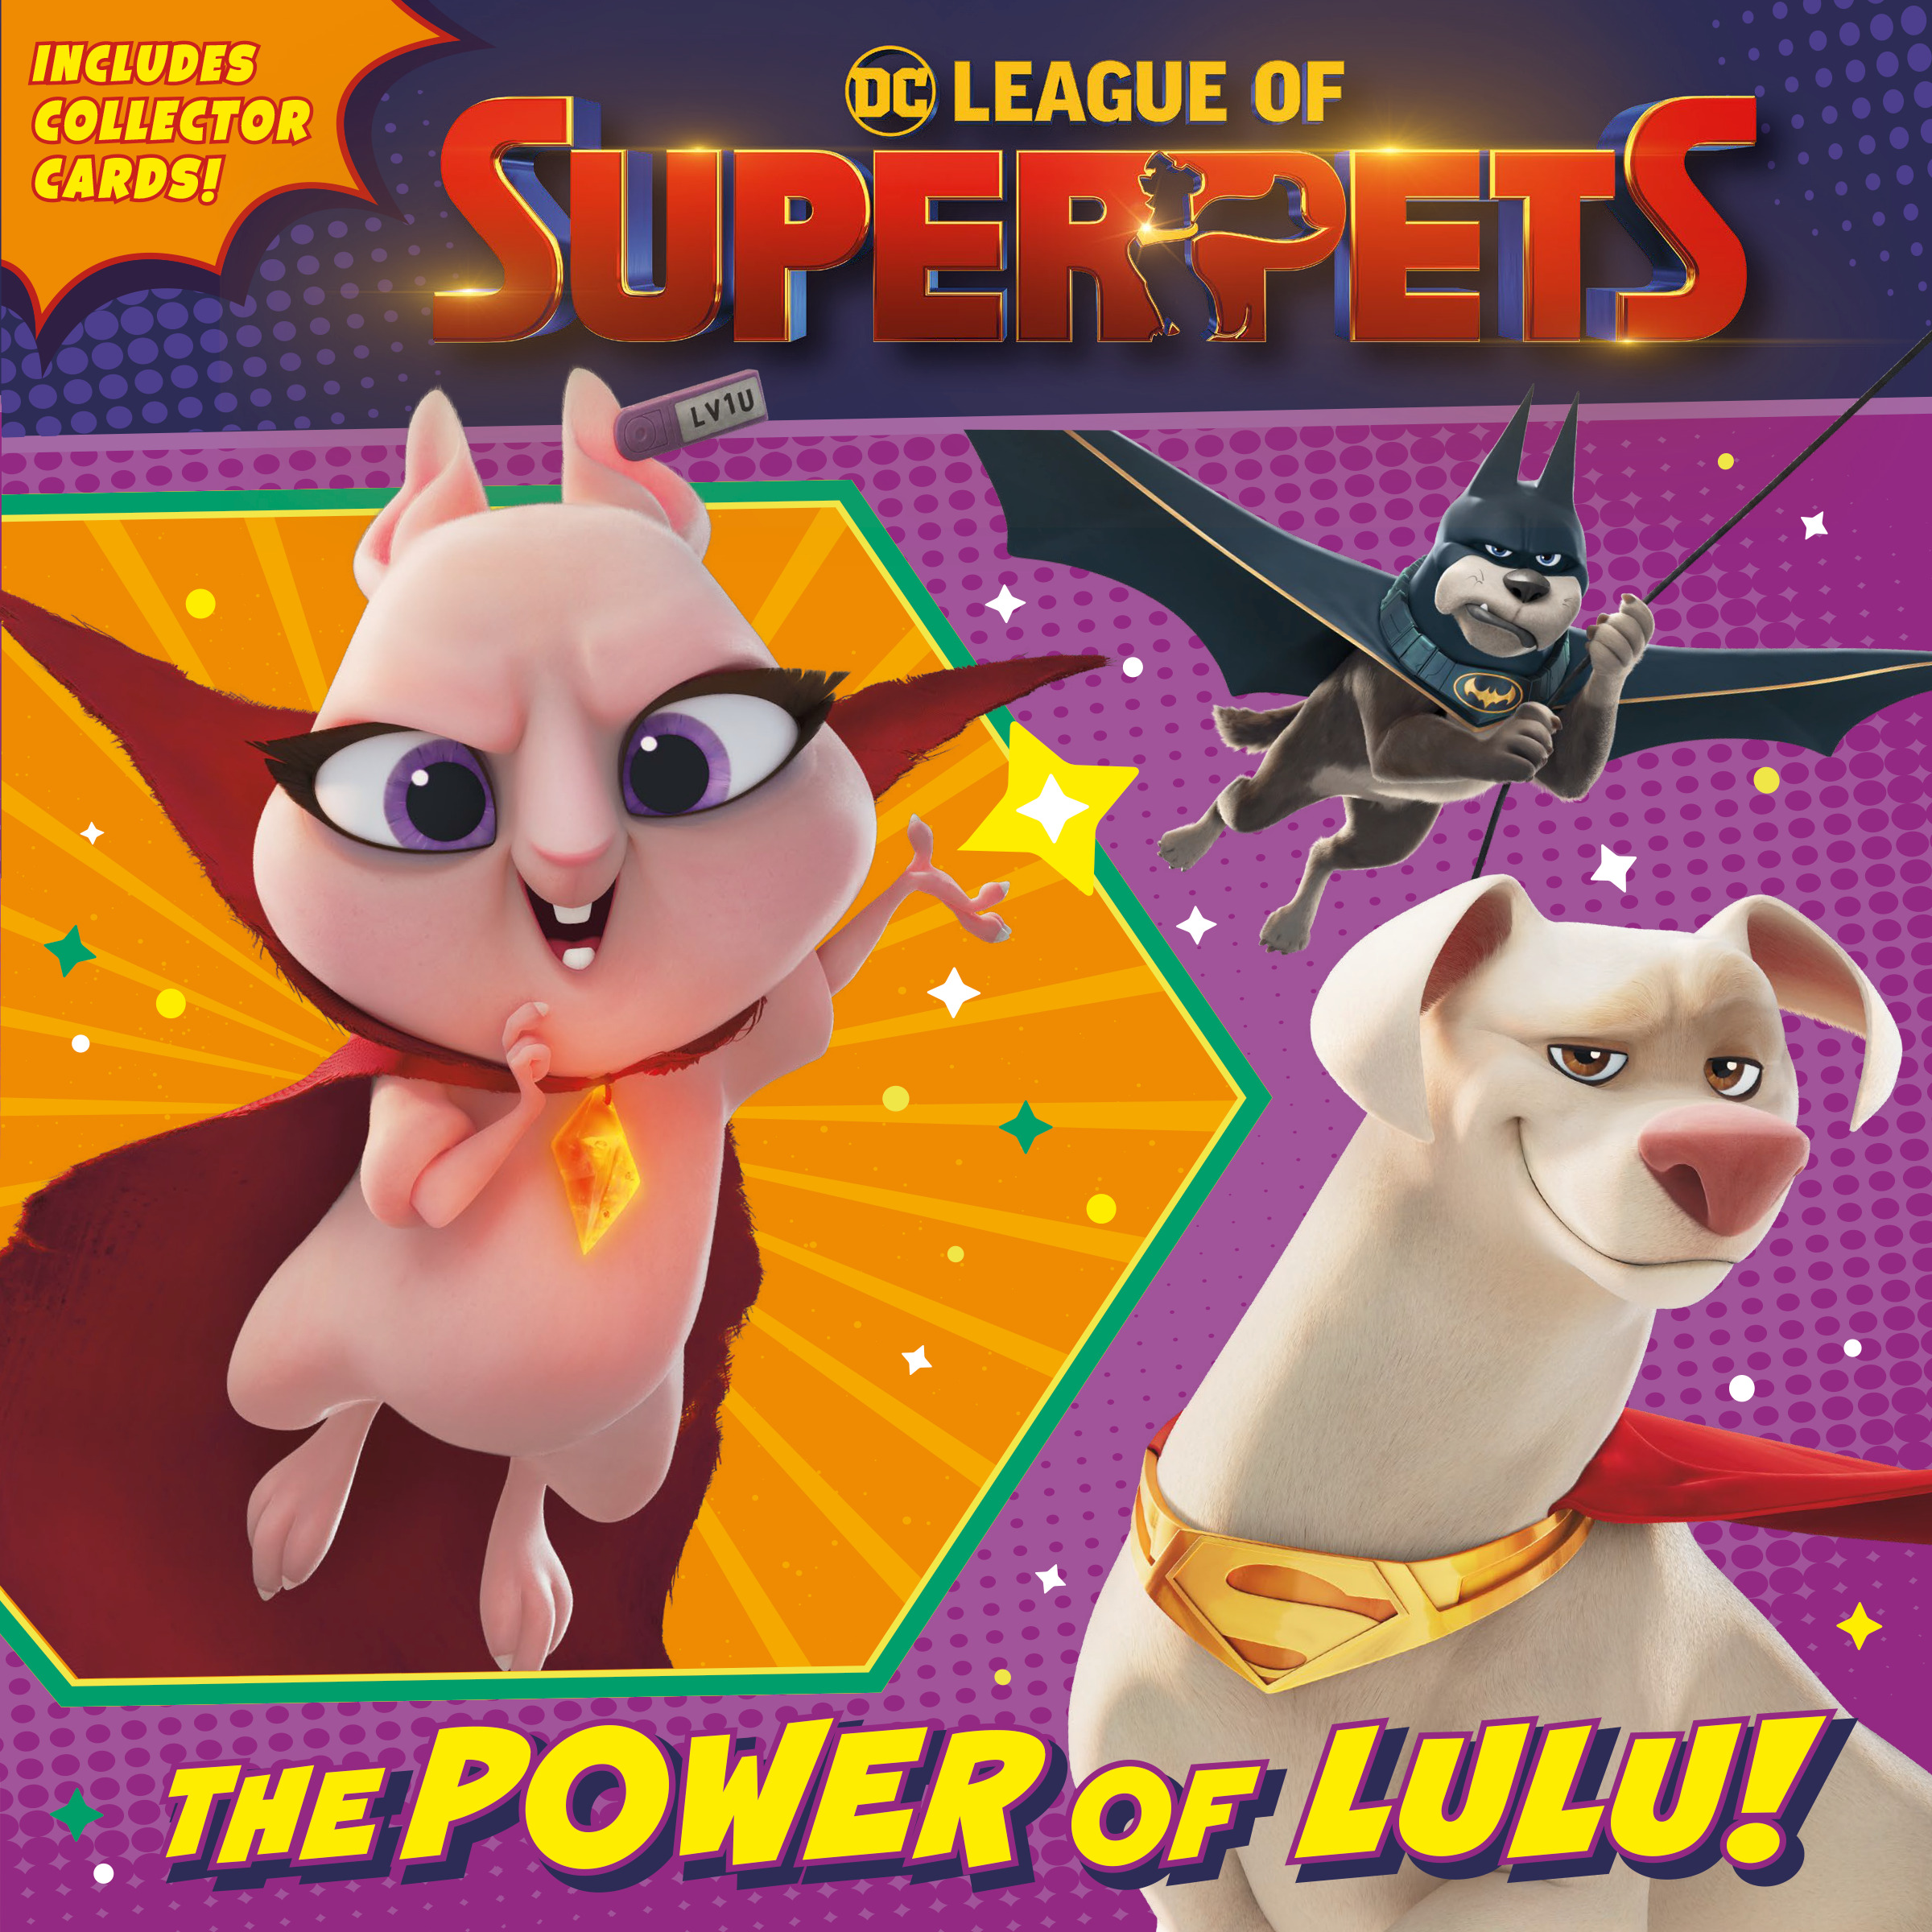 DC League of Super-Pets - The Power of Lulu!  : Includes collector cards! | Picture & board books